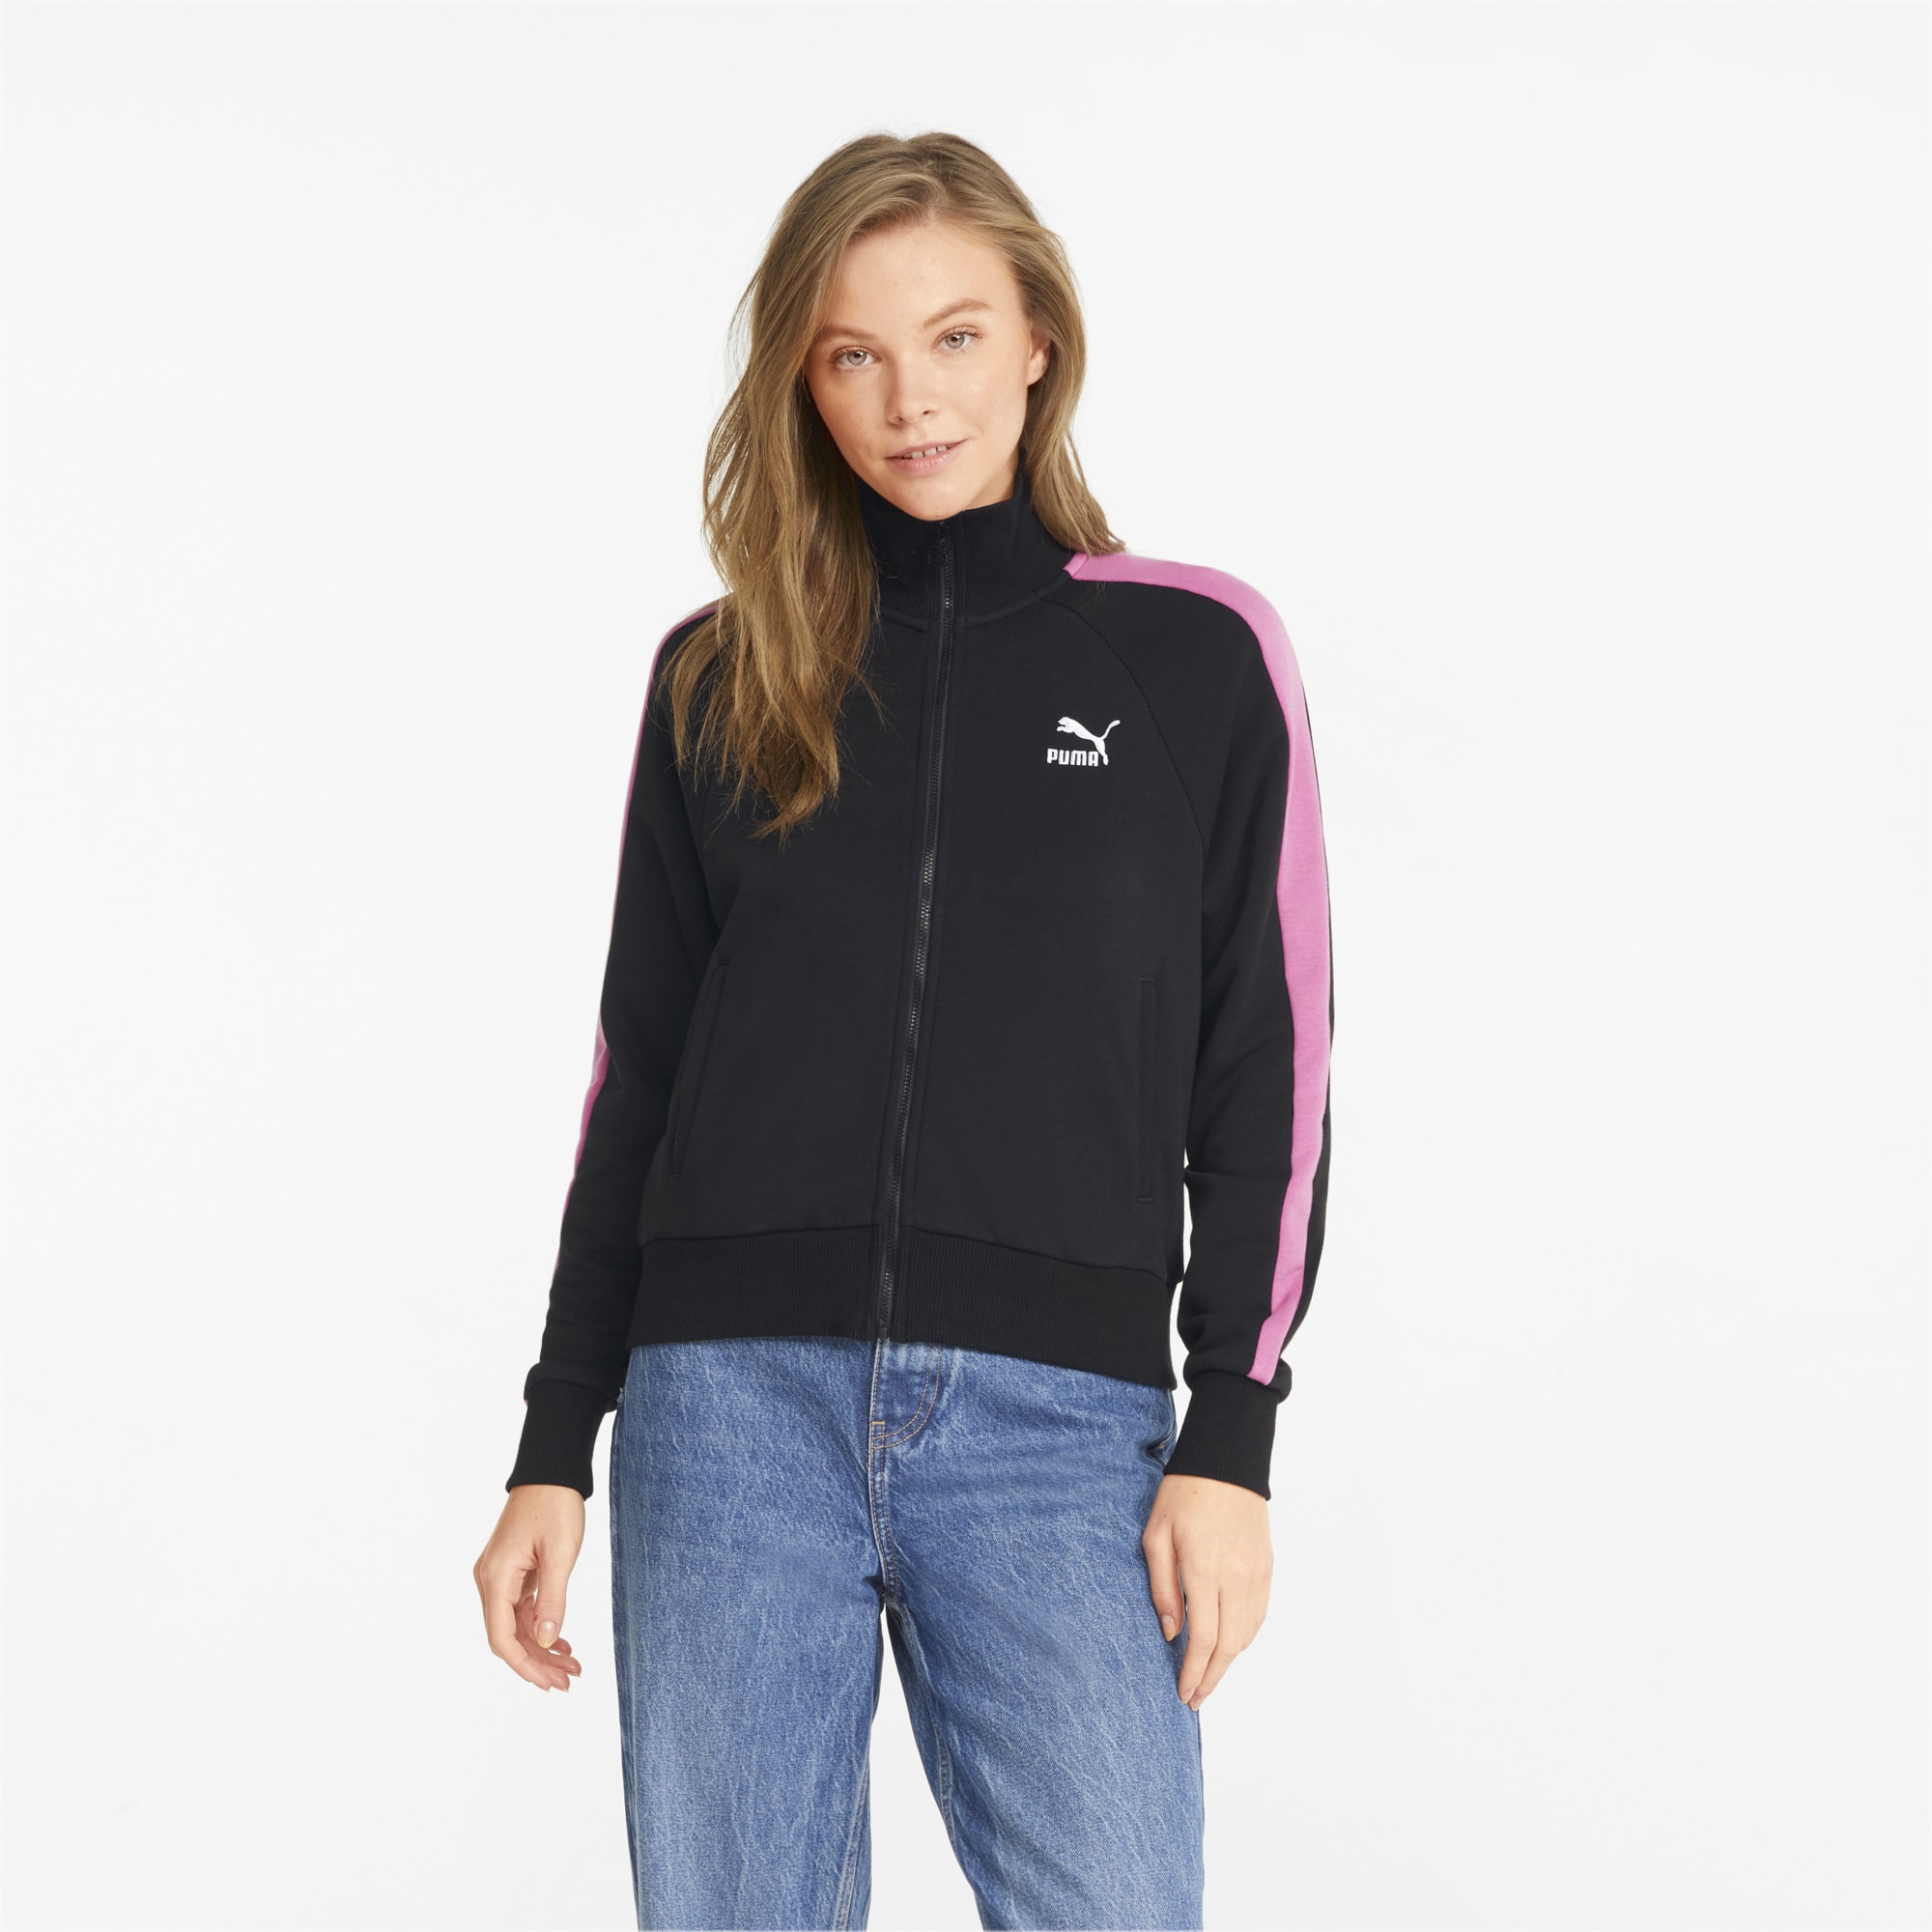 Puma Classics T7 track top in black with leopard print - ShopStyle  Activewear Jackets